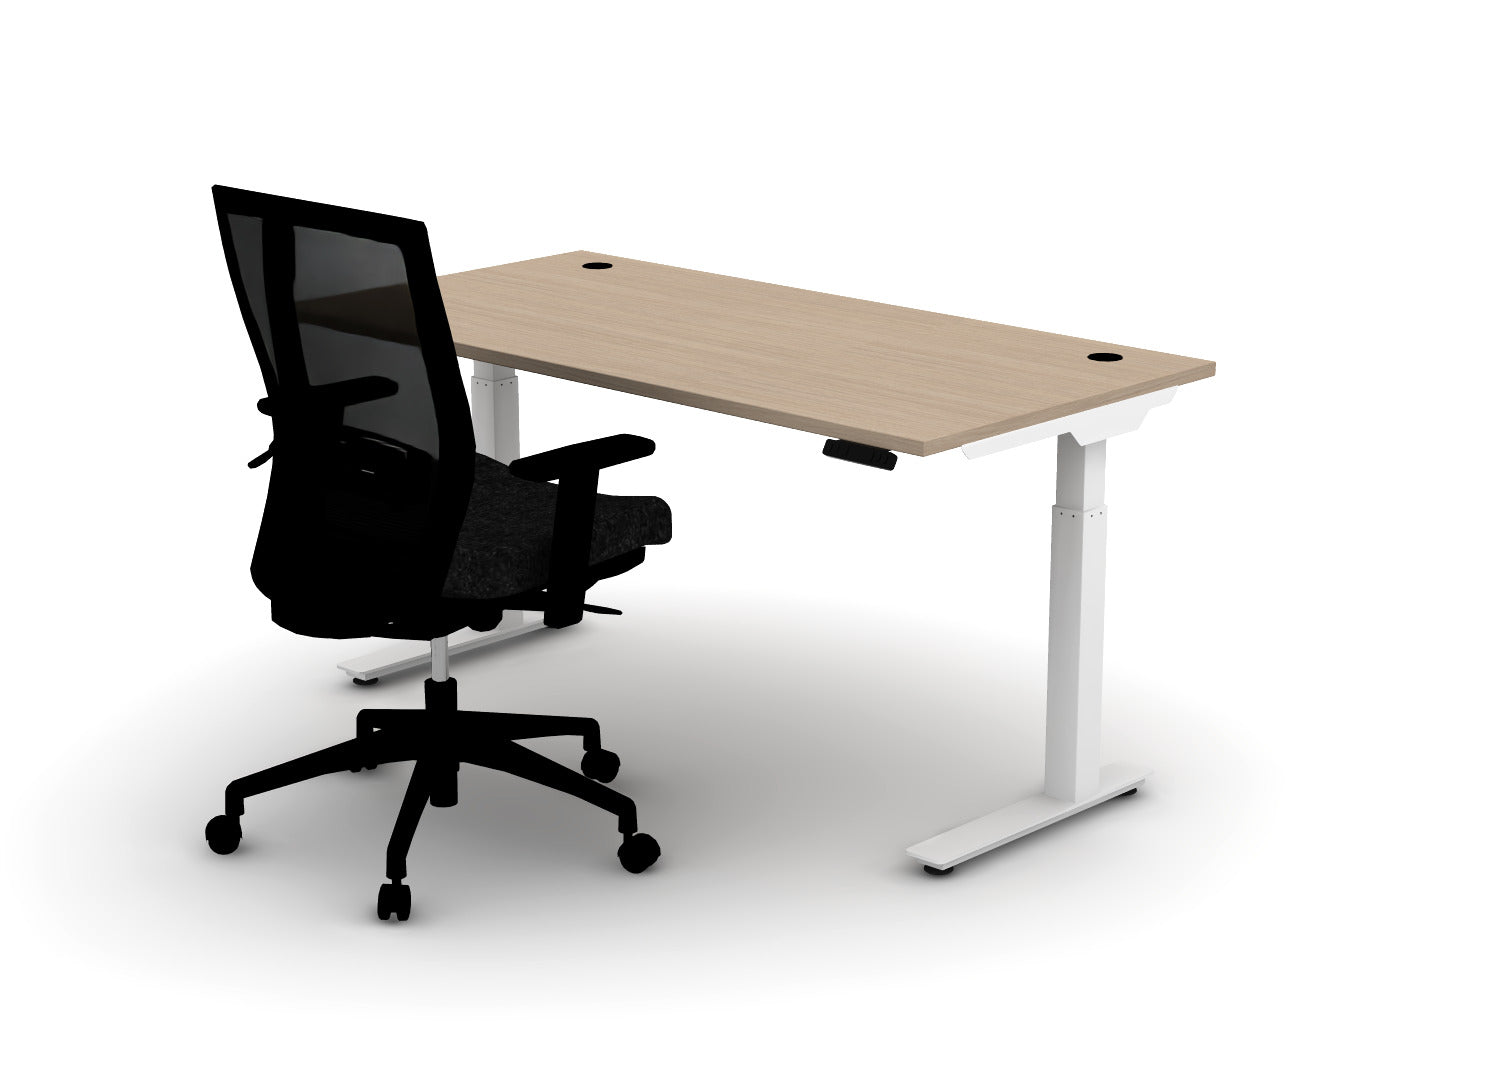 Think Desk (sit to stand) + Chair Bundle